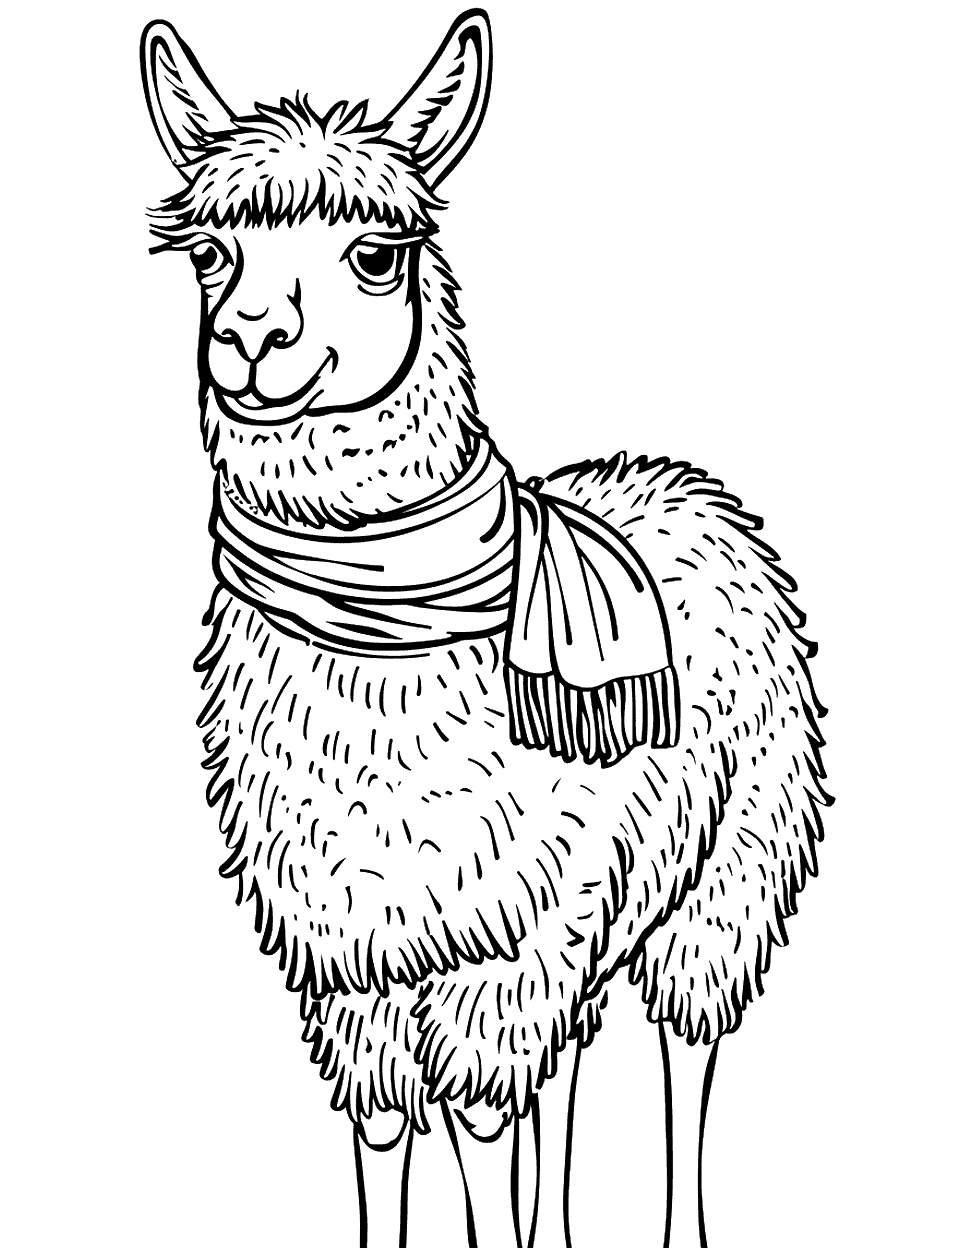 Llama with a Scarf Coloring Page - A llama dressed in a warm, knitted scarf for winter.